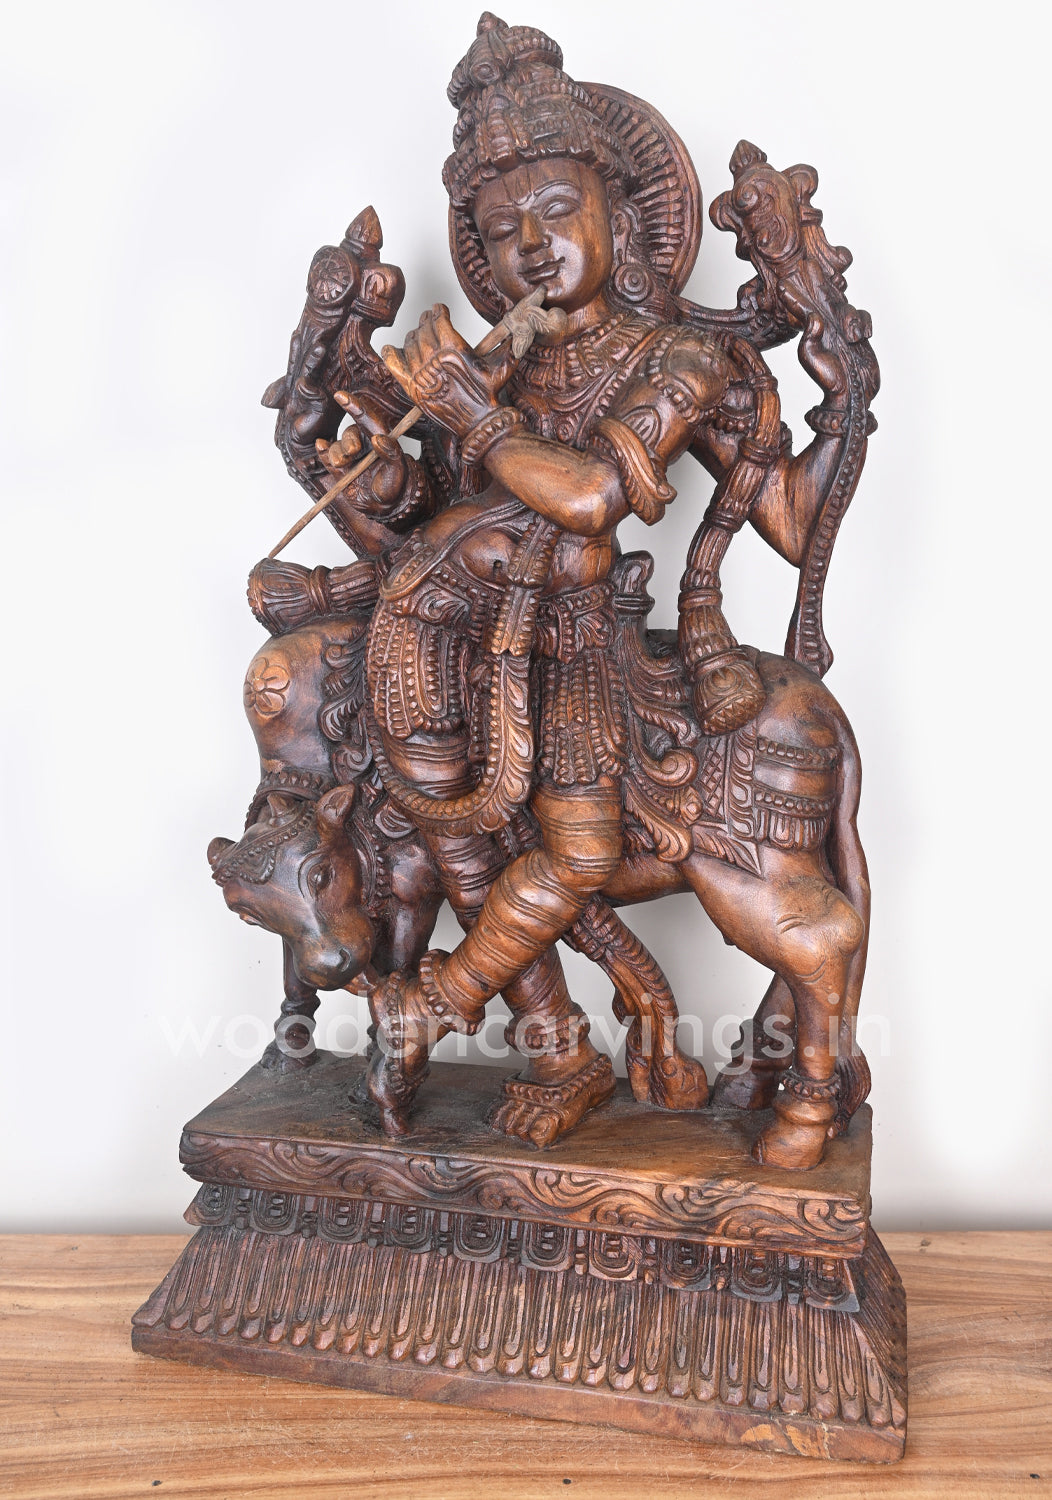 Beautiful Lord Krishna Standing With Cow and Playing With Flute Wooden Sculpture 36"